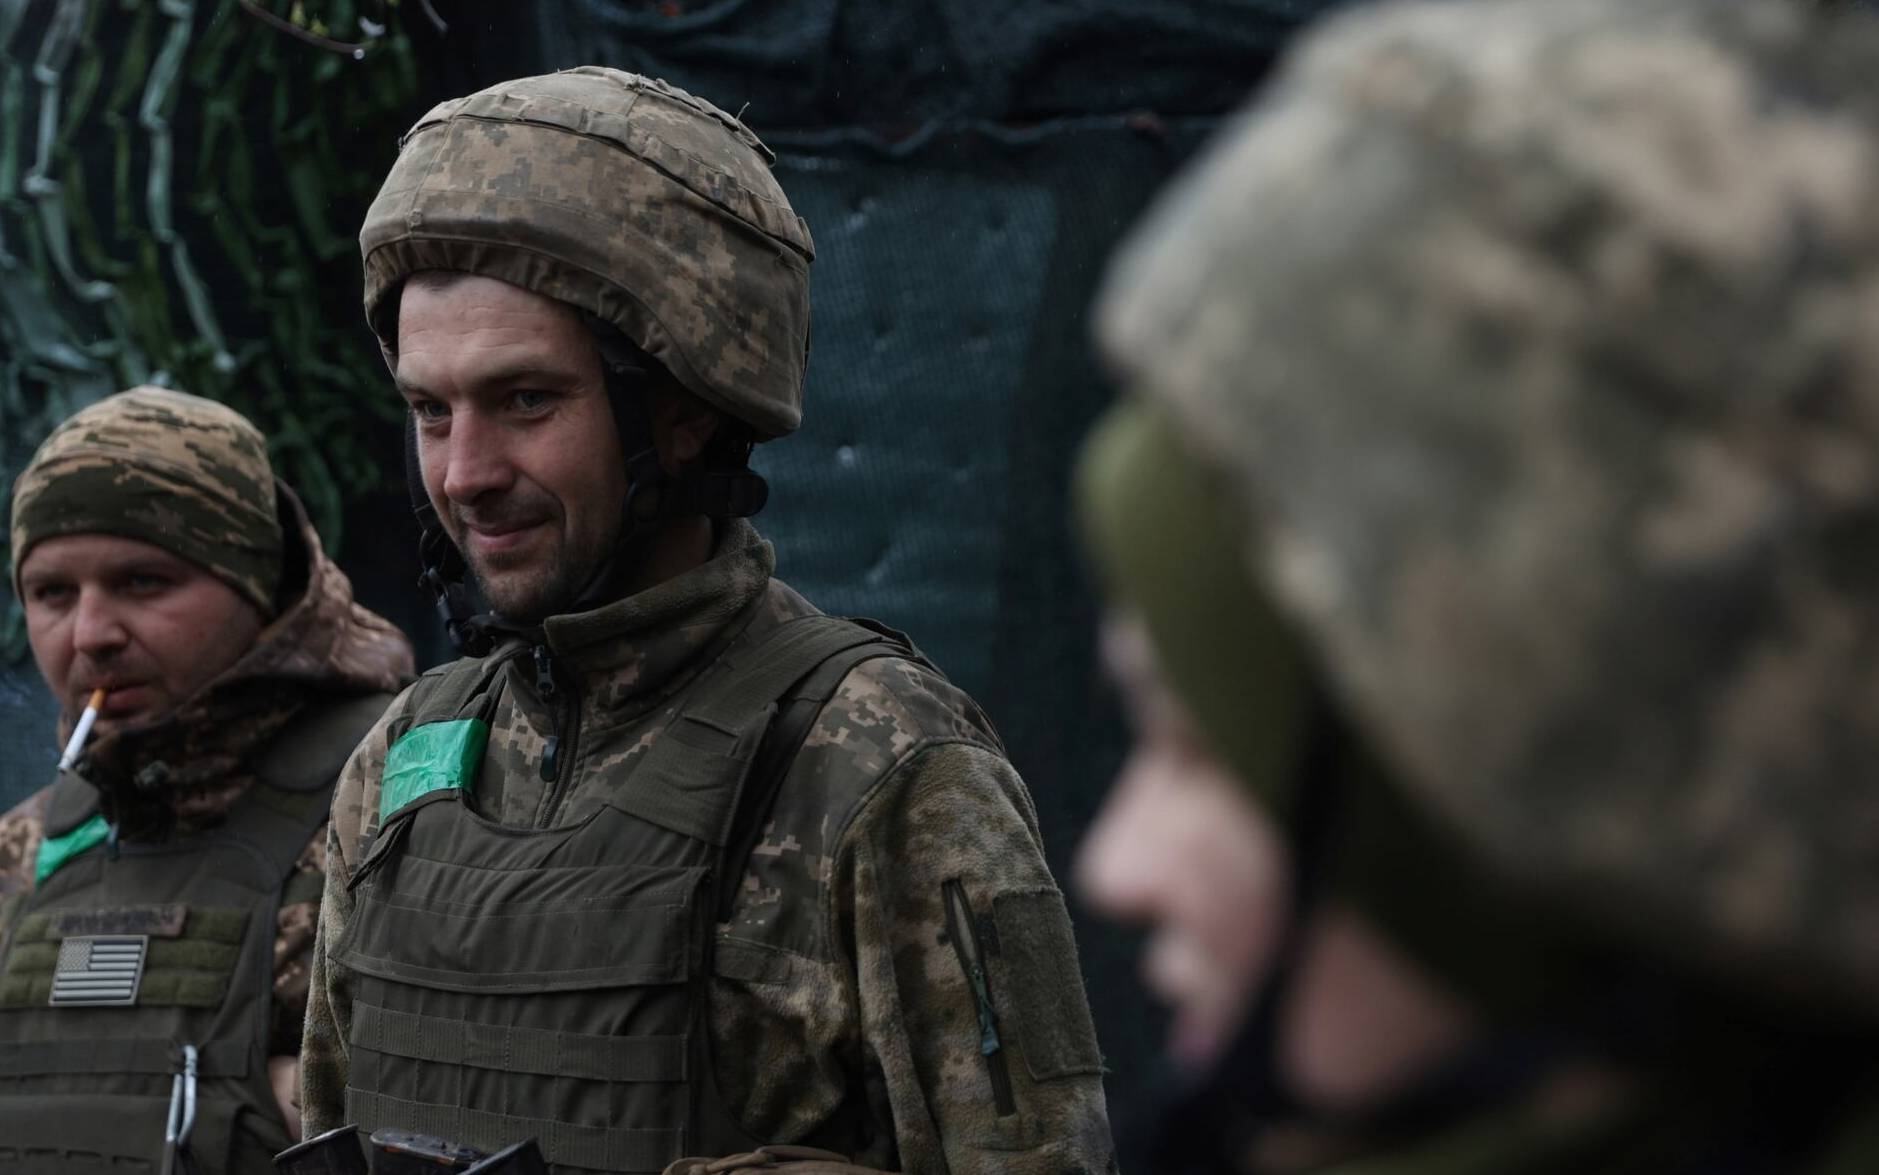 Ukrainian servicemen attend at their position on the front line not far from the town of New York, Donetsk region on April 14, 2022, amid Russian invasion of Ukraine. (Photo by Anatolii Stepanov / AFP)